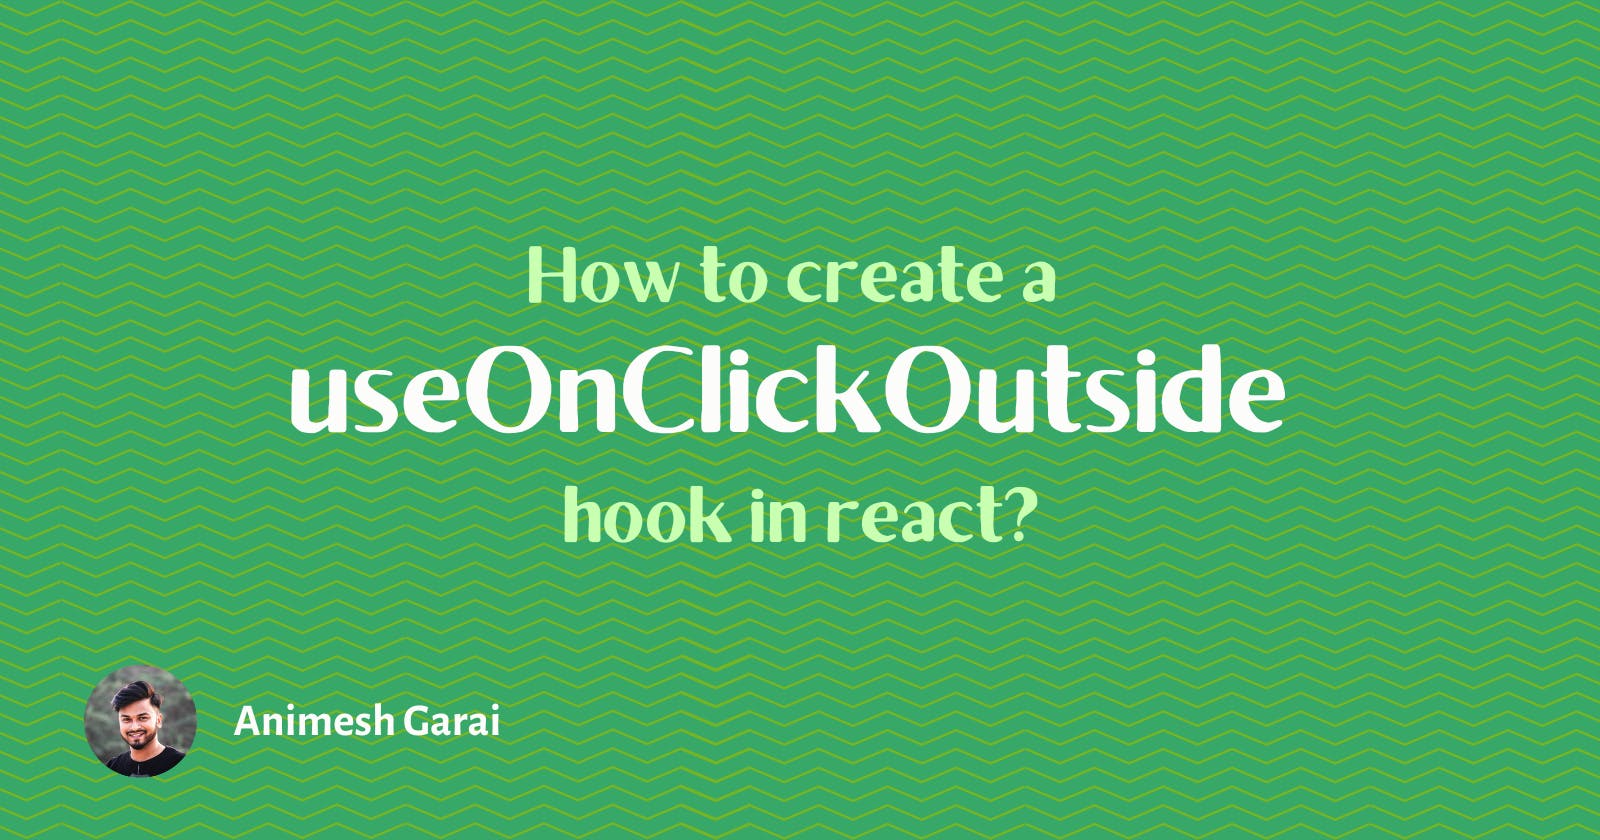 How to create a reusable useOnClickOutside hook in react?